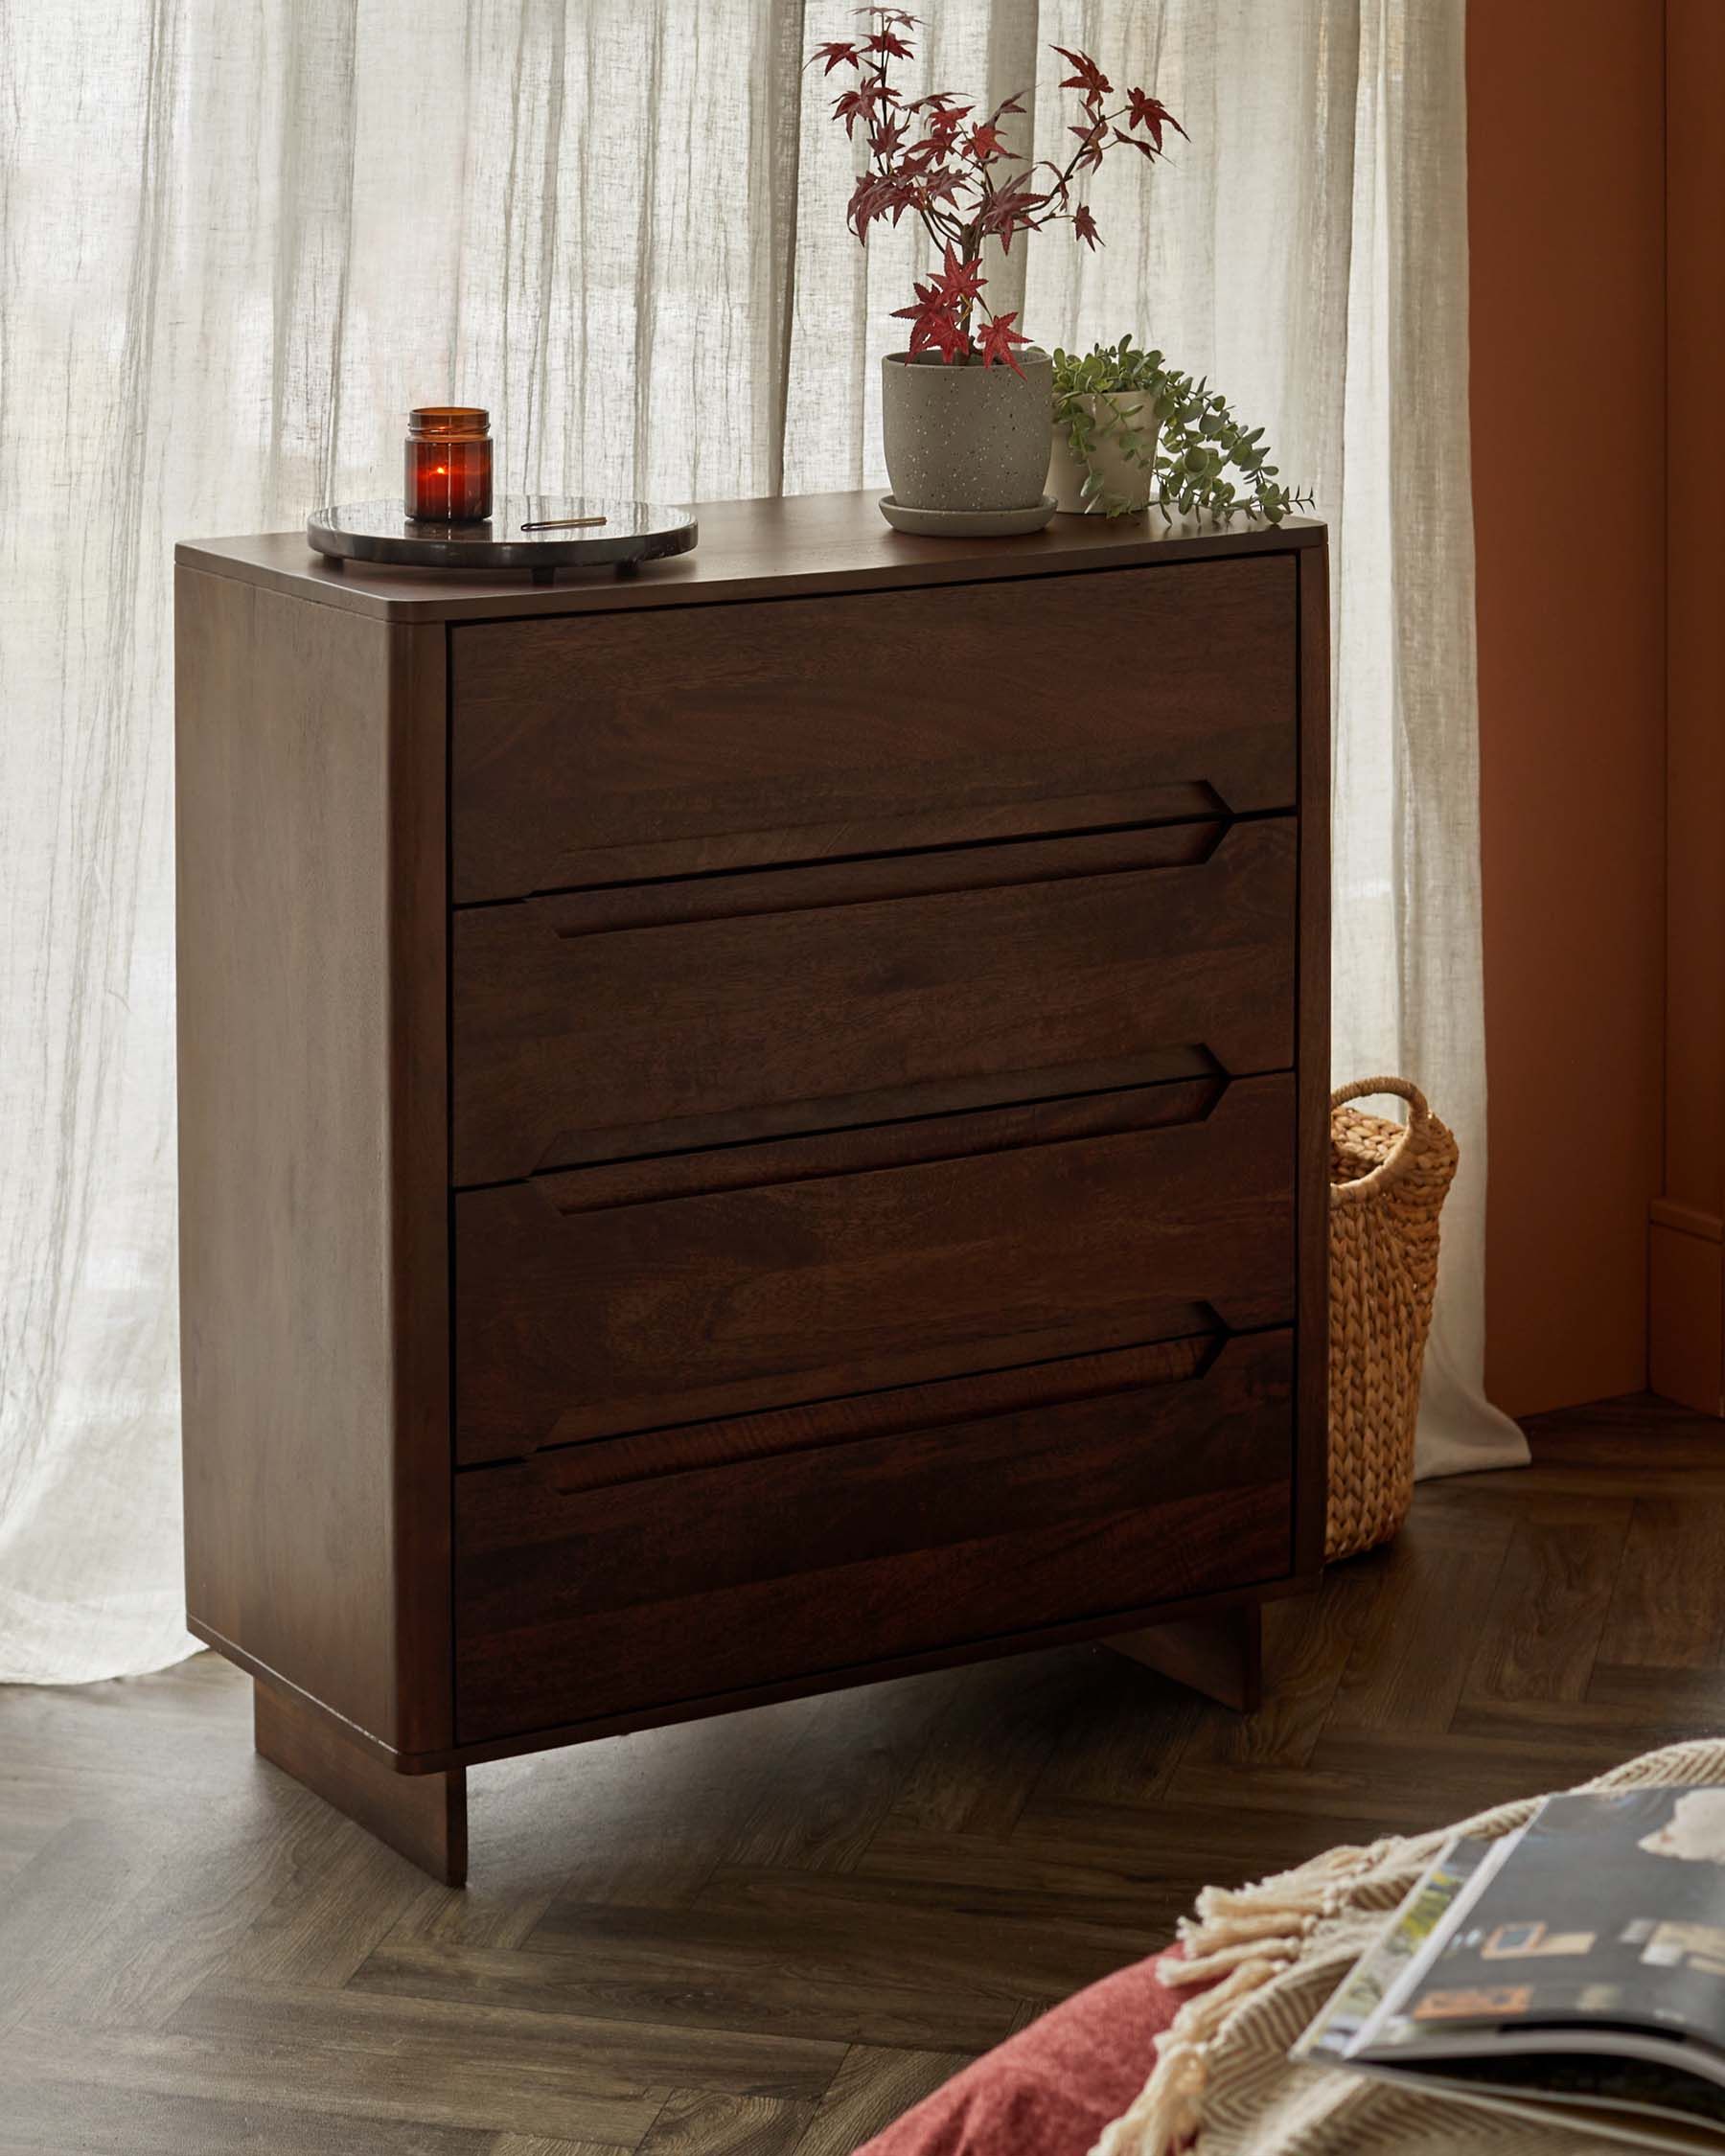 The Timeless Elegance of Solid Wood Bedroom Chest of Drawers: A Must-Have for Every Bedroom